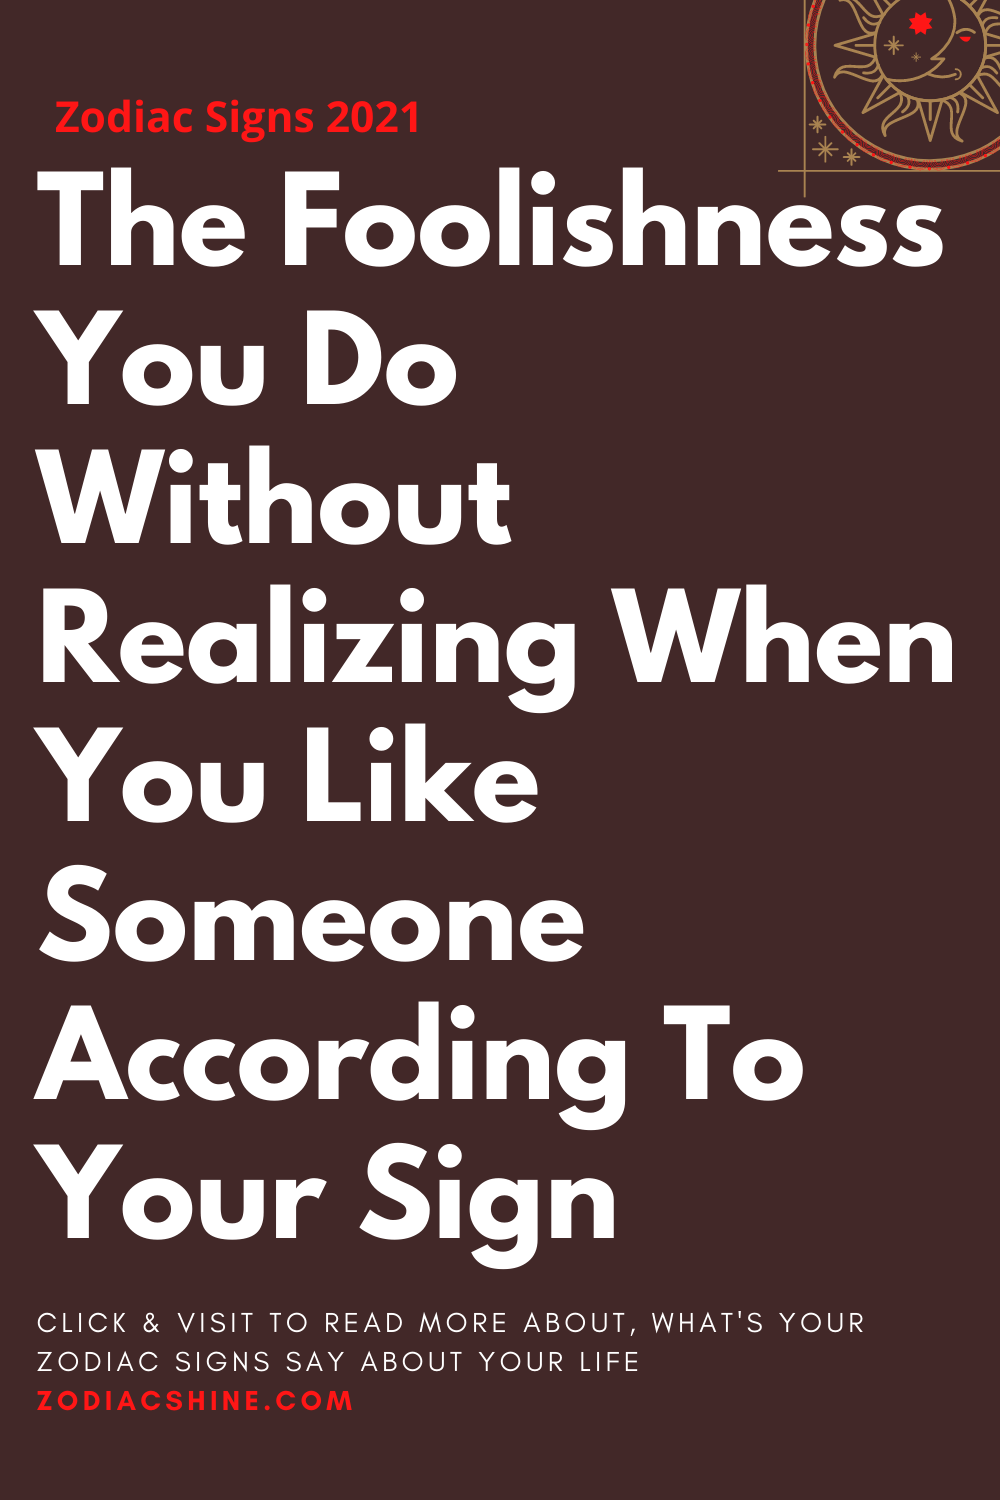 The Foolishness You Do Without Realizing When You Like Someone According To Your Sign